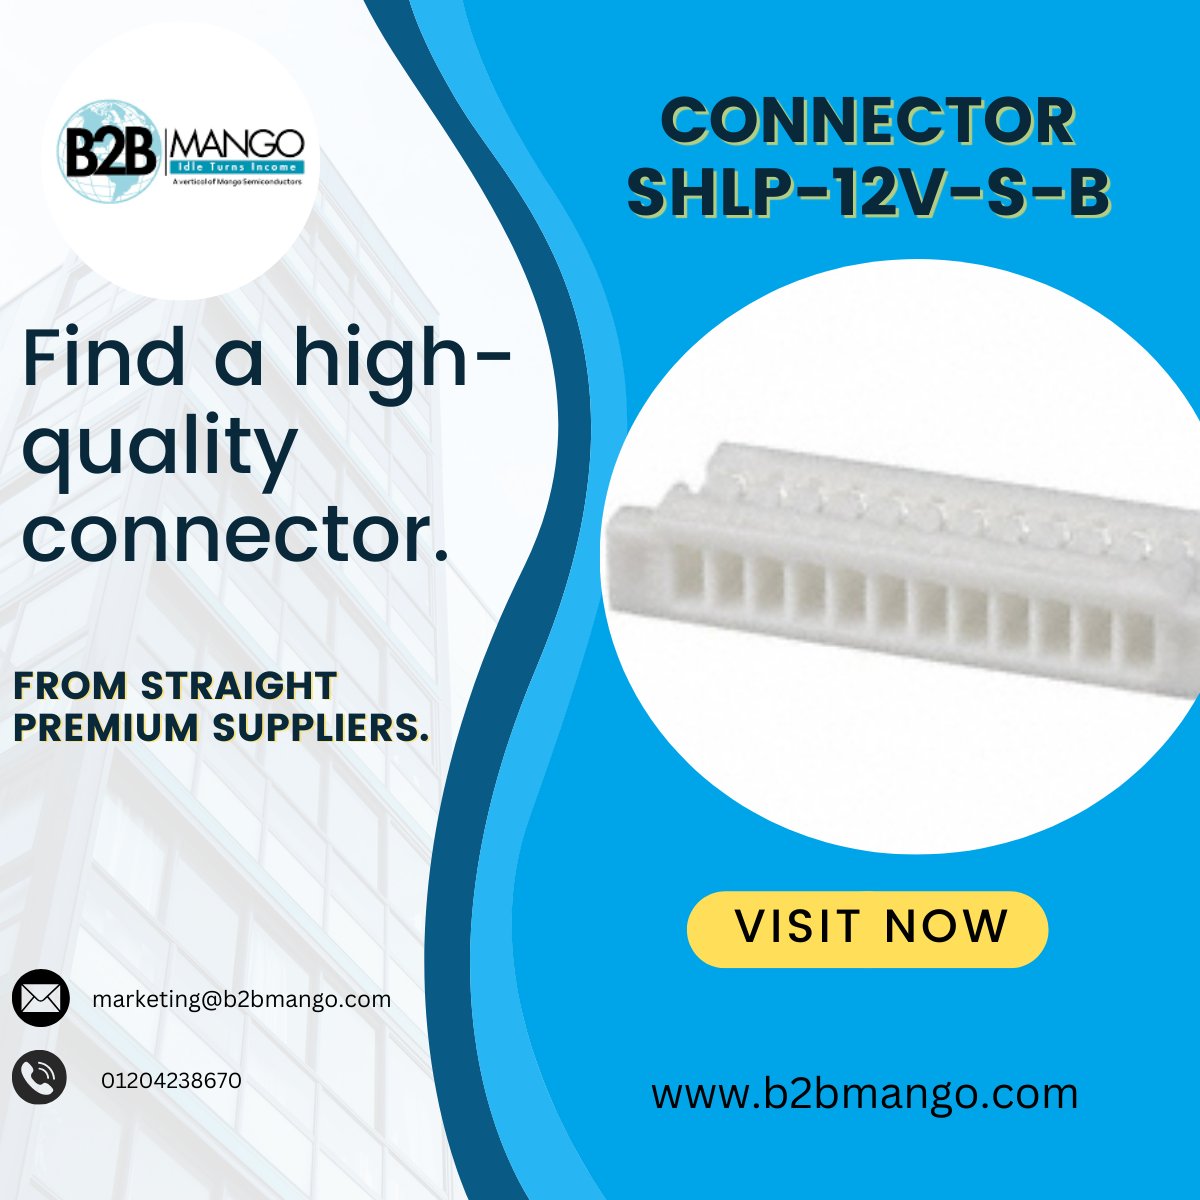 Find a high-quality connector 𝗦𝗛𝗟𝗣-𝟭𝟮𝗩-𝗦-𝗕 straight from premium suppliers!

𝗘𝘅𝗽𝗹𝗼𝗿𝗲 𝗡𝗼𝘄: B2BMango.com

#B2BMango #InventoryManagement #BusinessGrowth #FreeListings #GrowYourBusiness